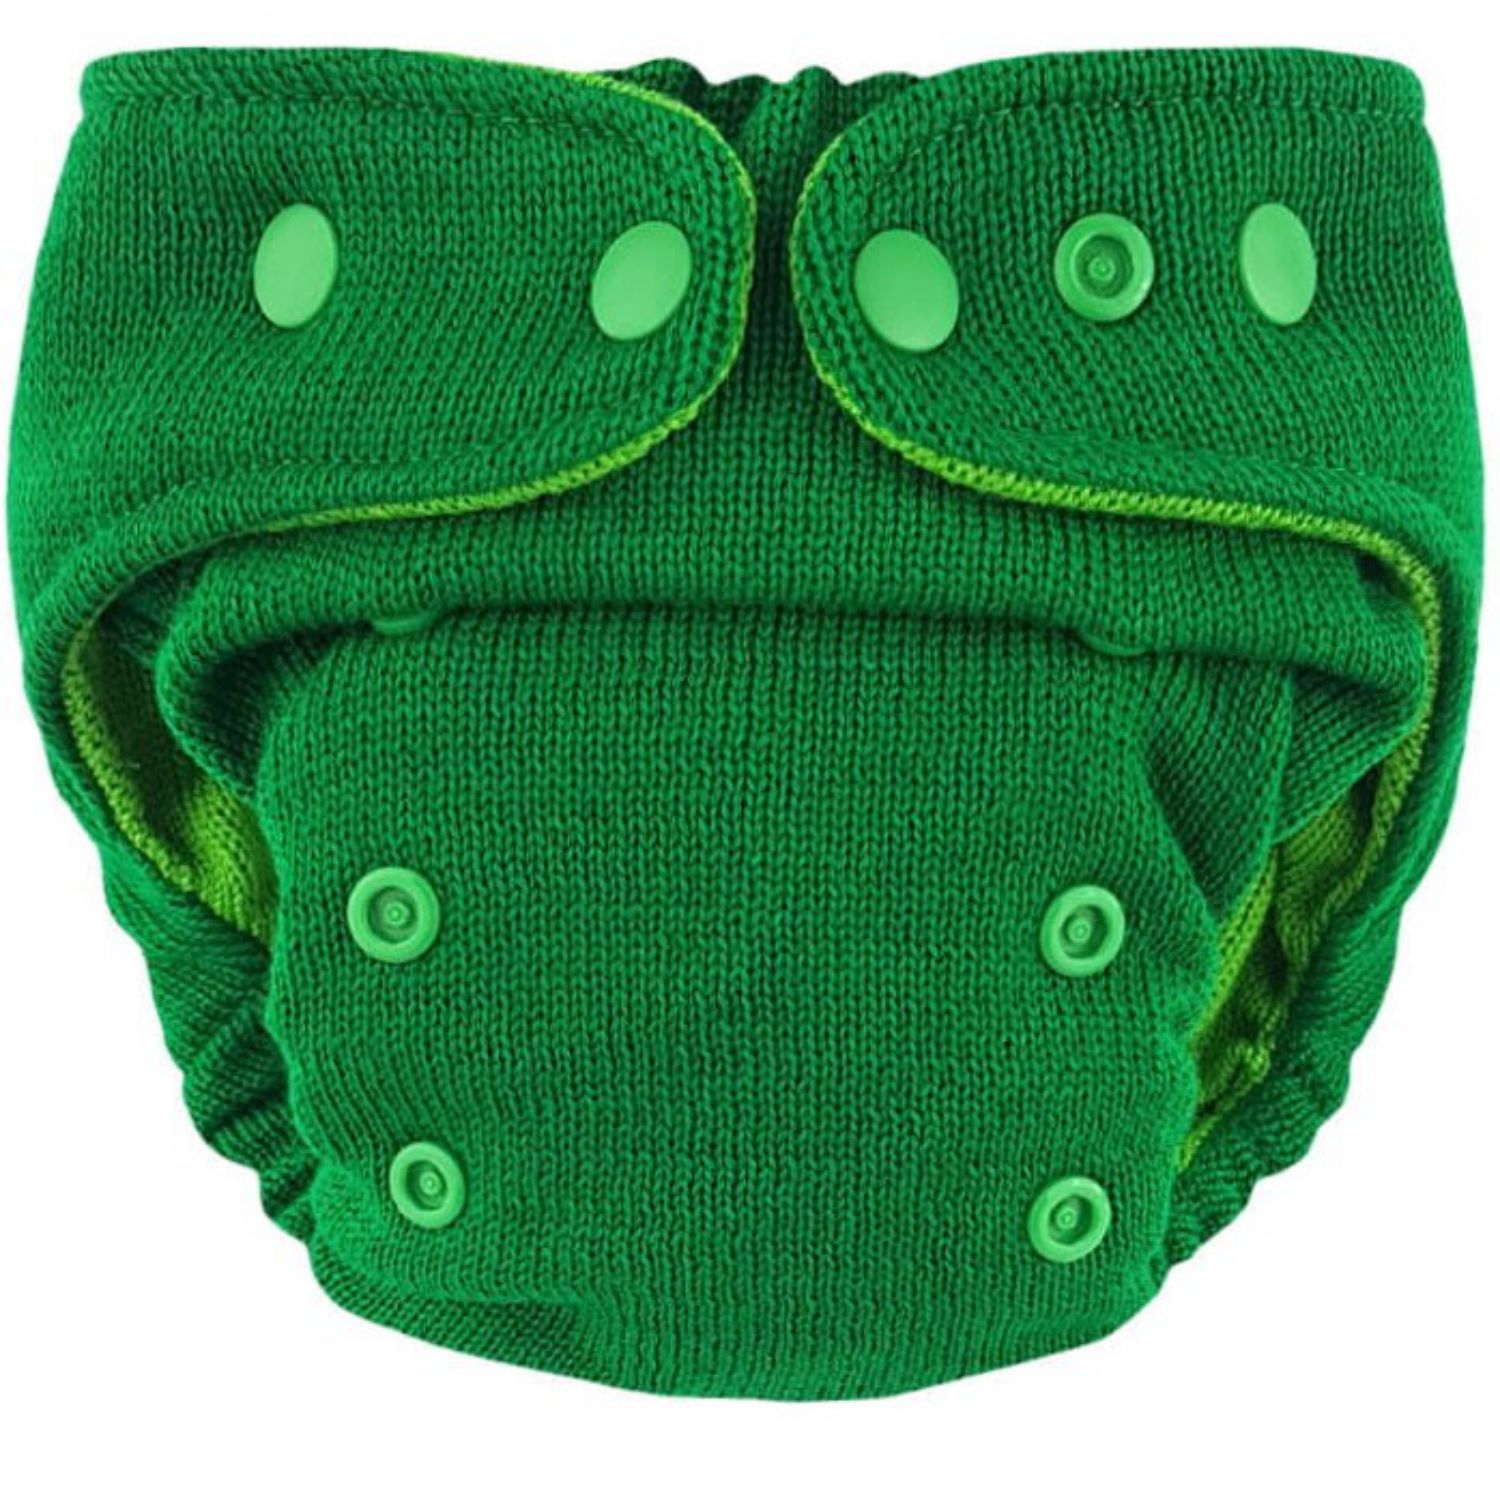 Magabi Merino Wool Cover OS (knitted) (Color: (62) Billard Green) Magabi Colour: Billard Green